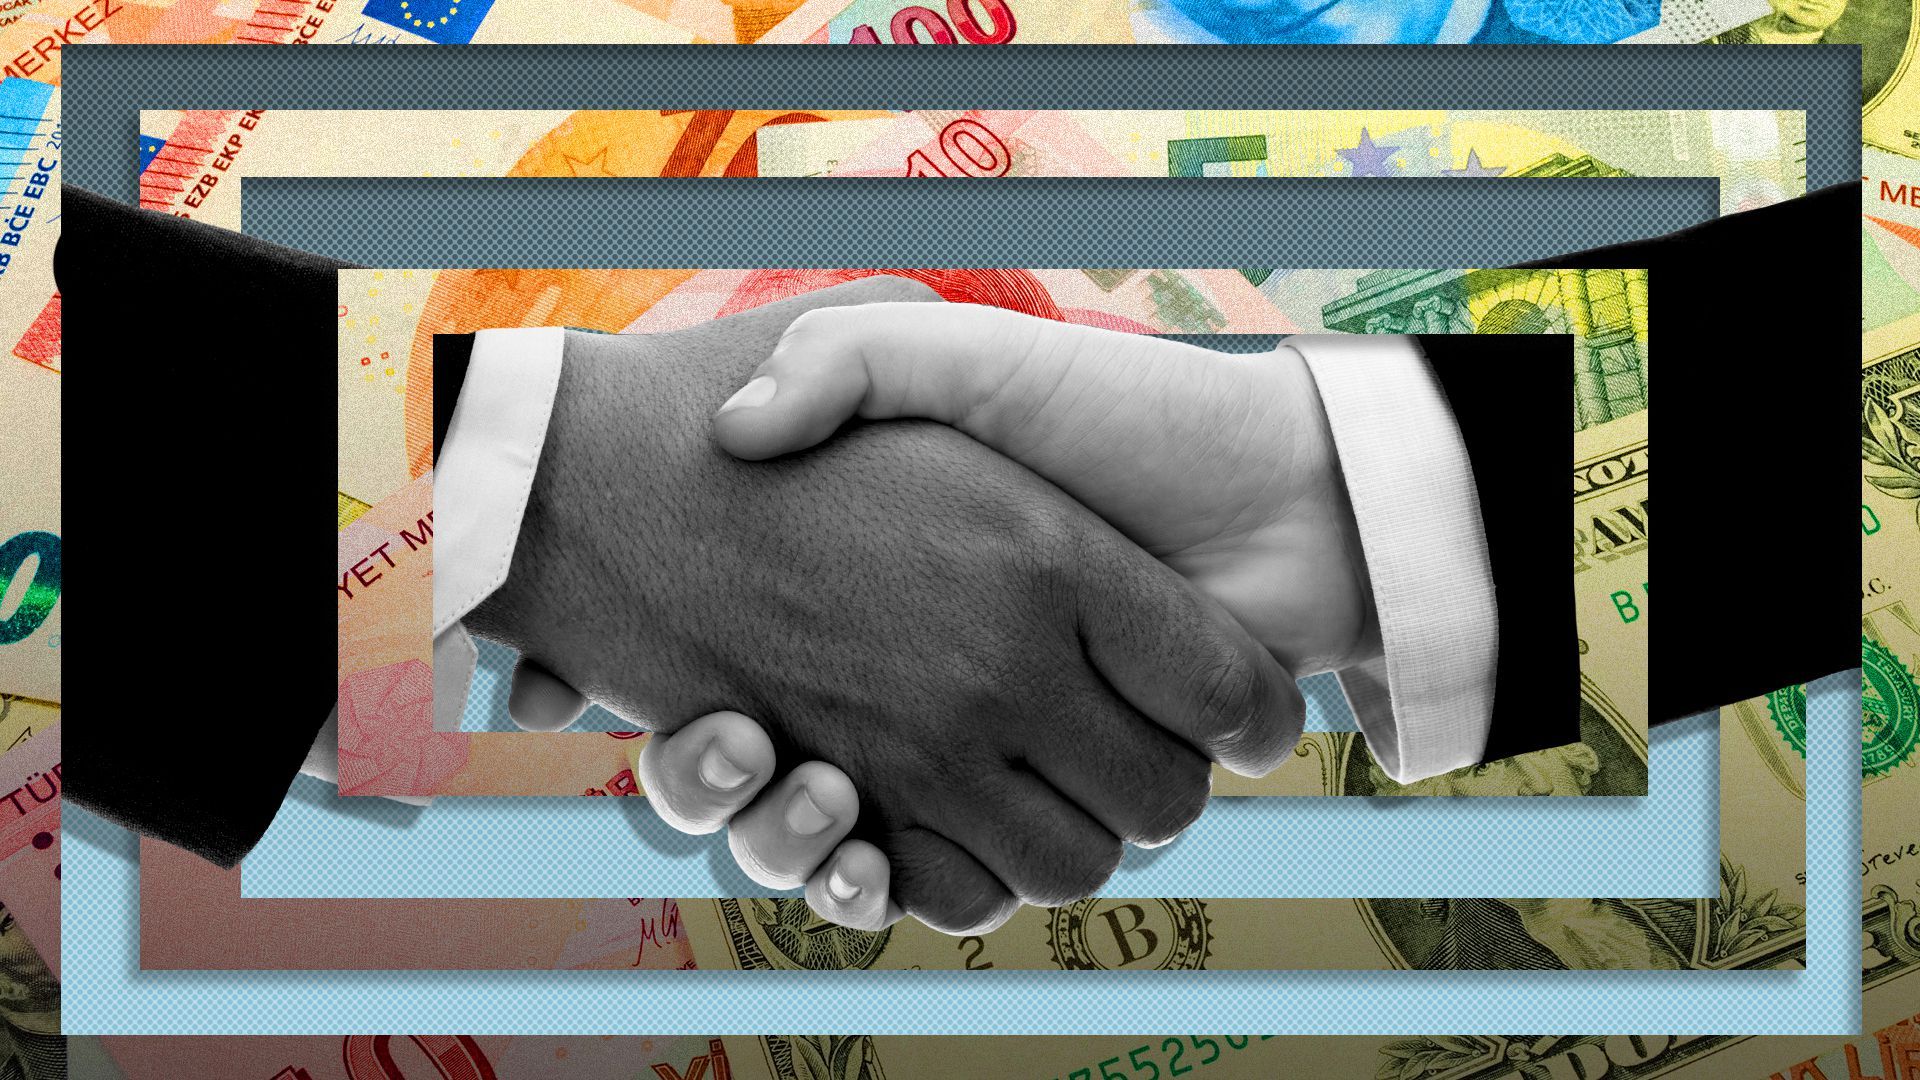  Illustrated collage of a handshake surrounded by rectangles made from international currency.